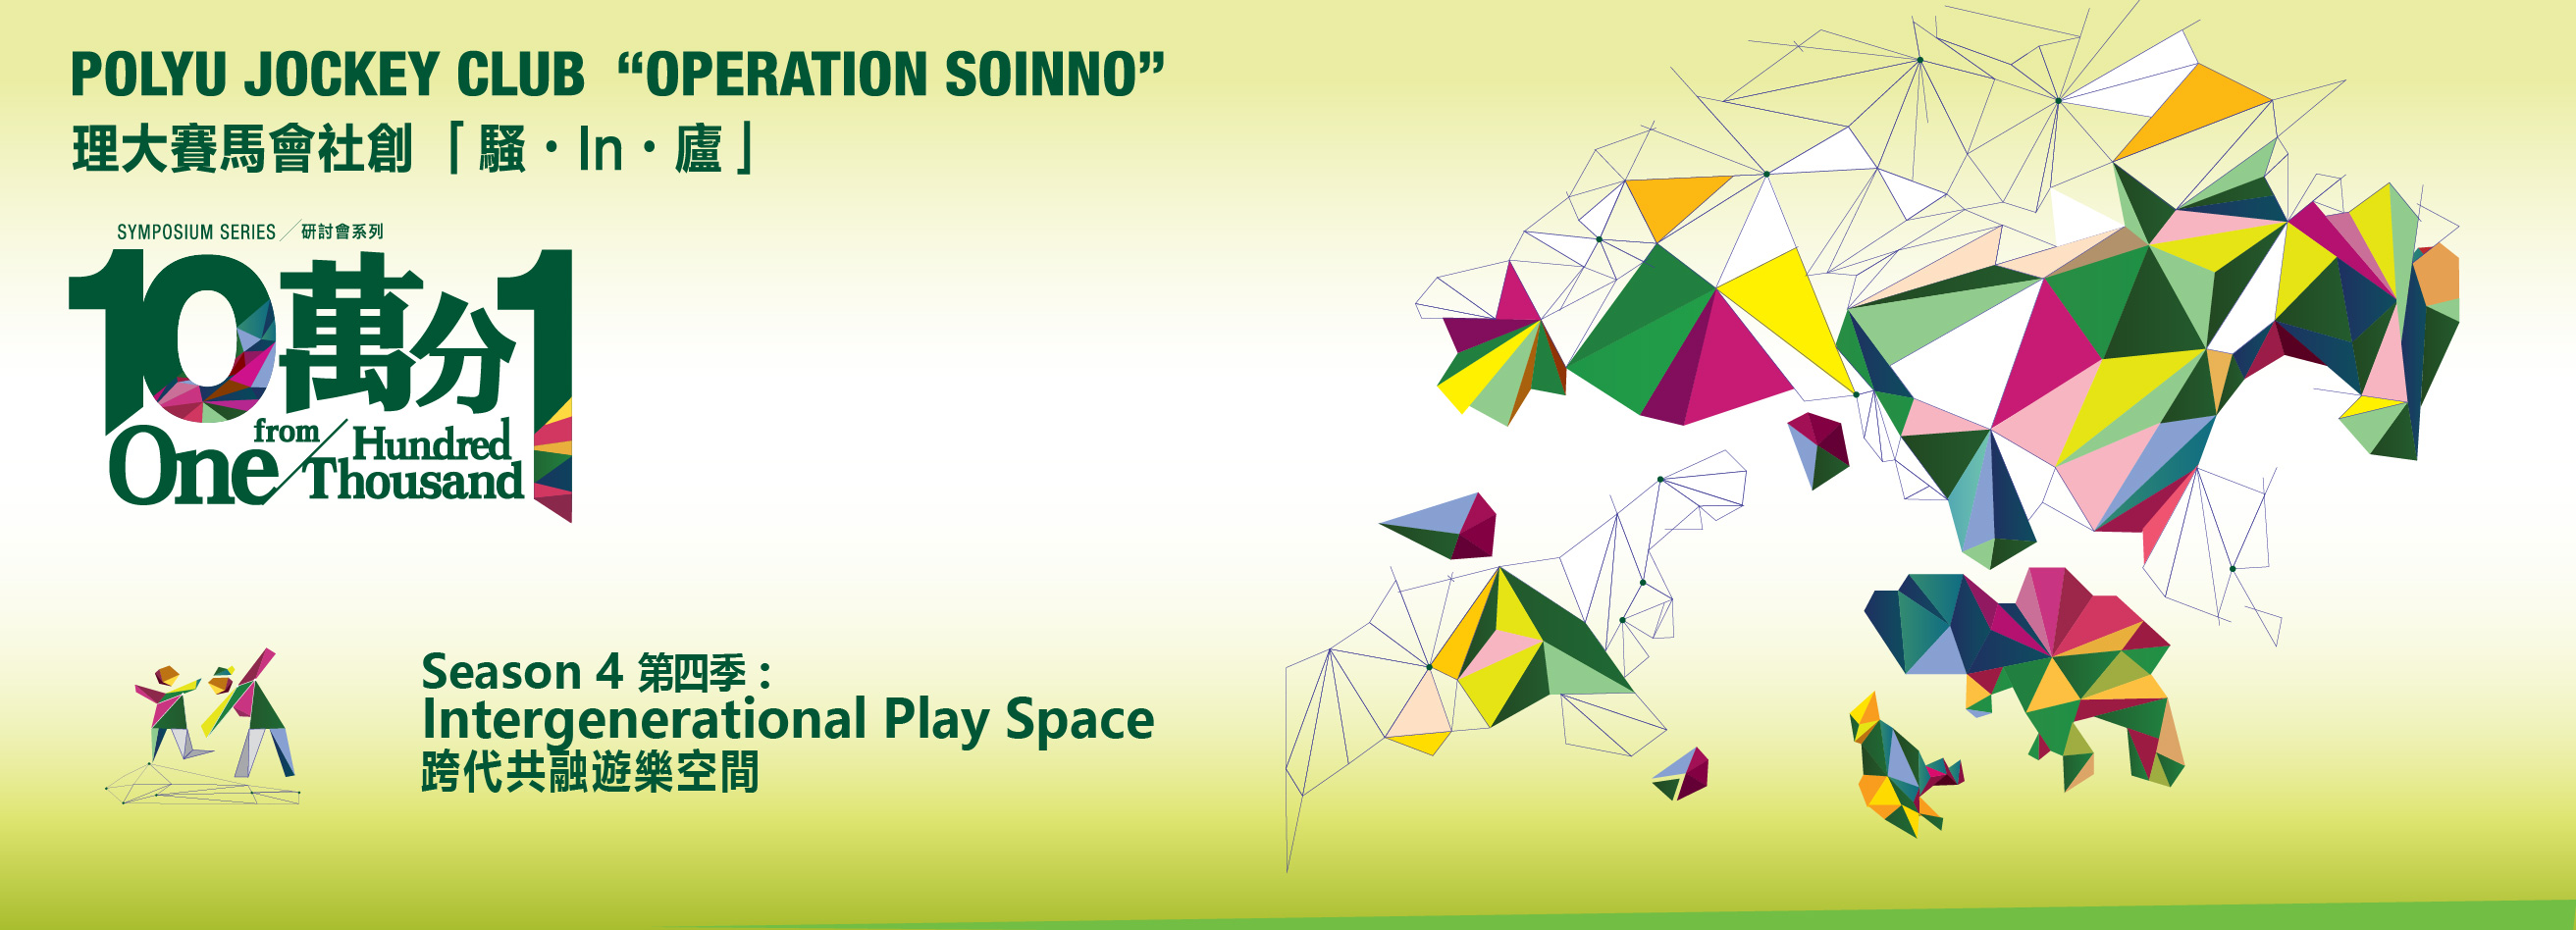 Main Page - Season 4: Intergenerational Play Space